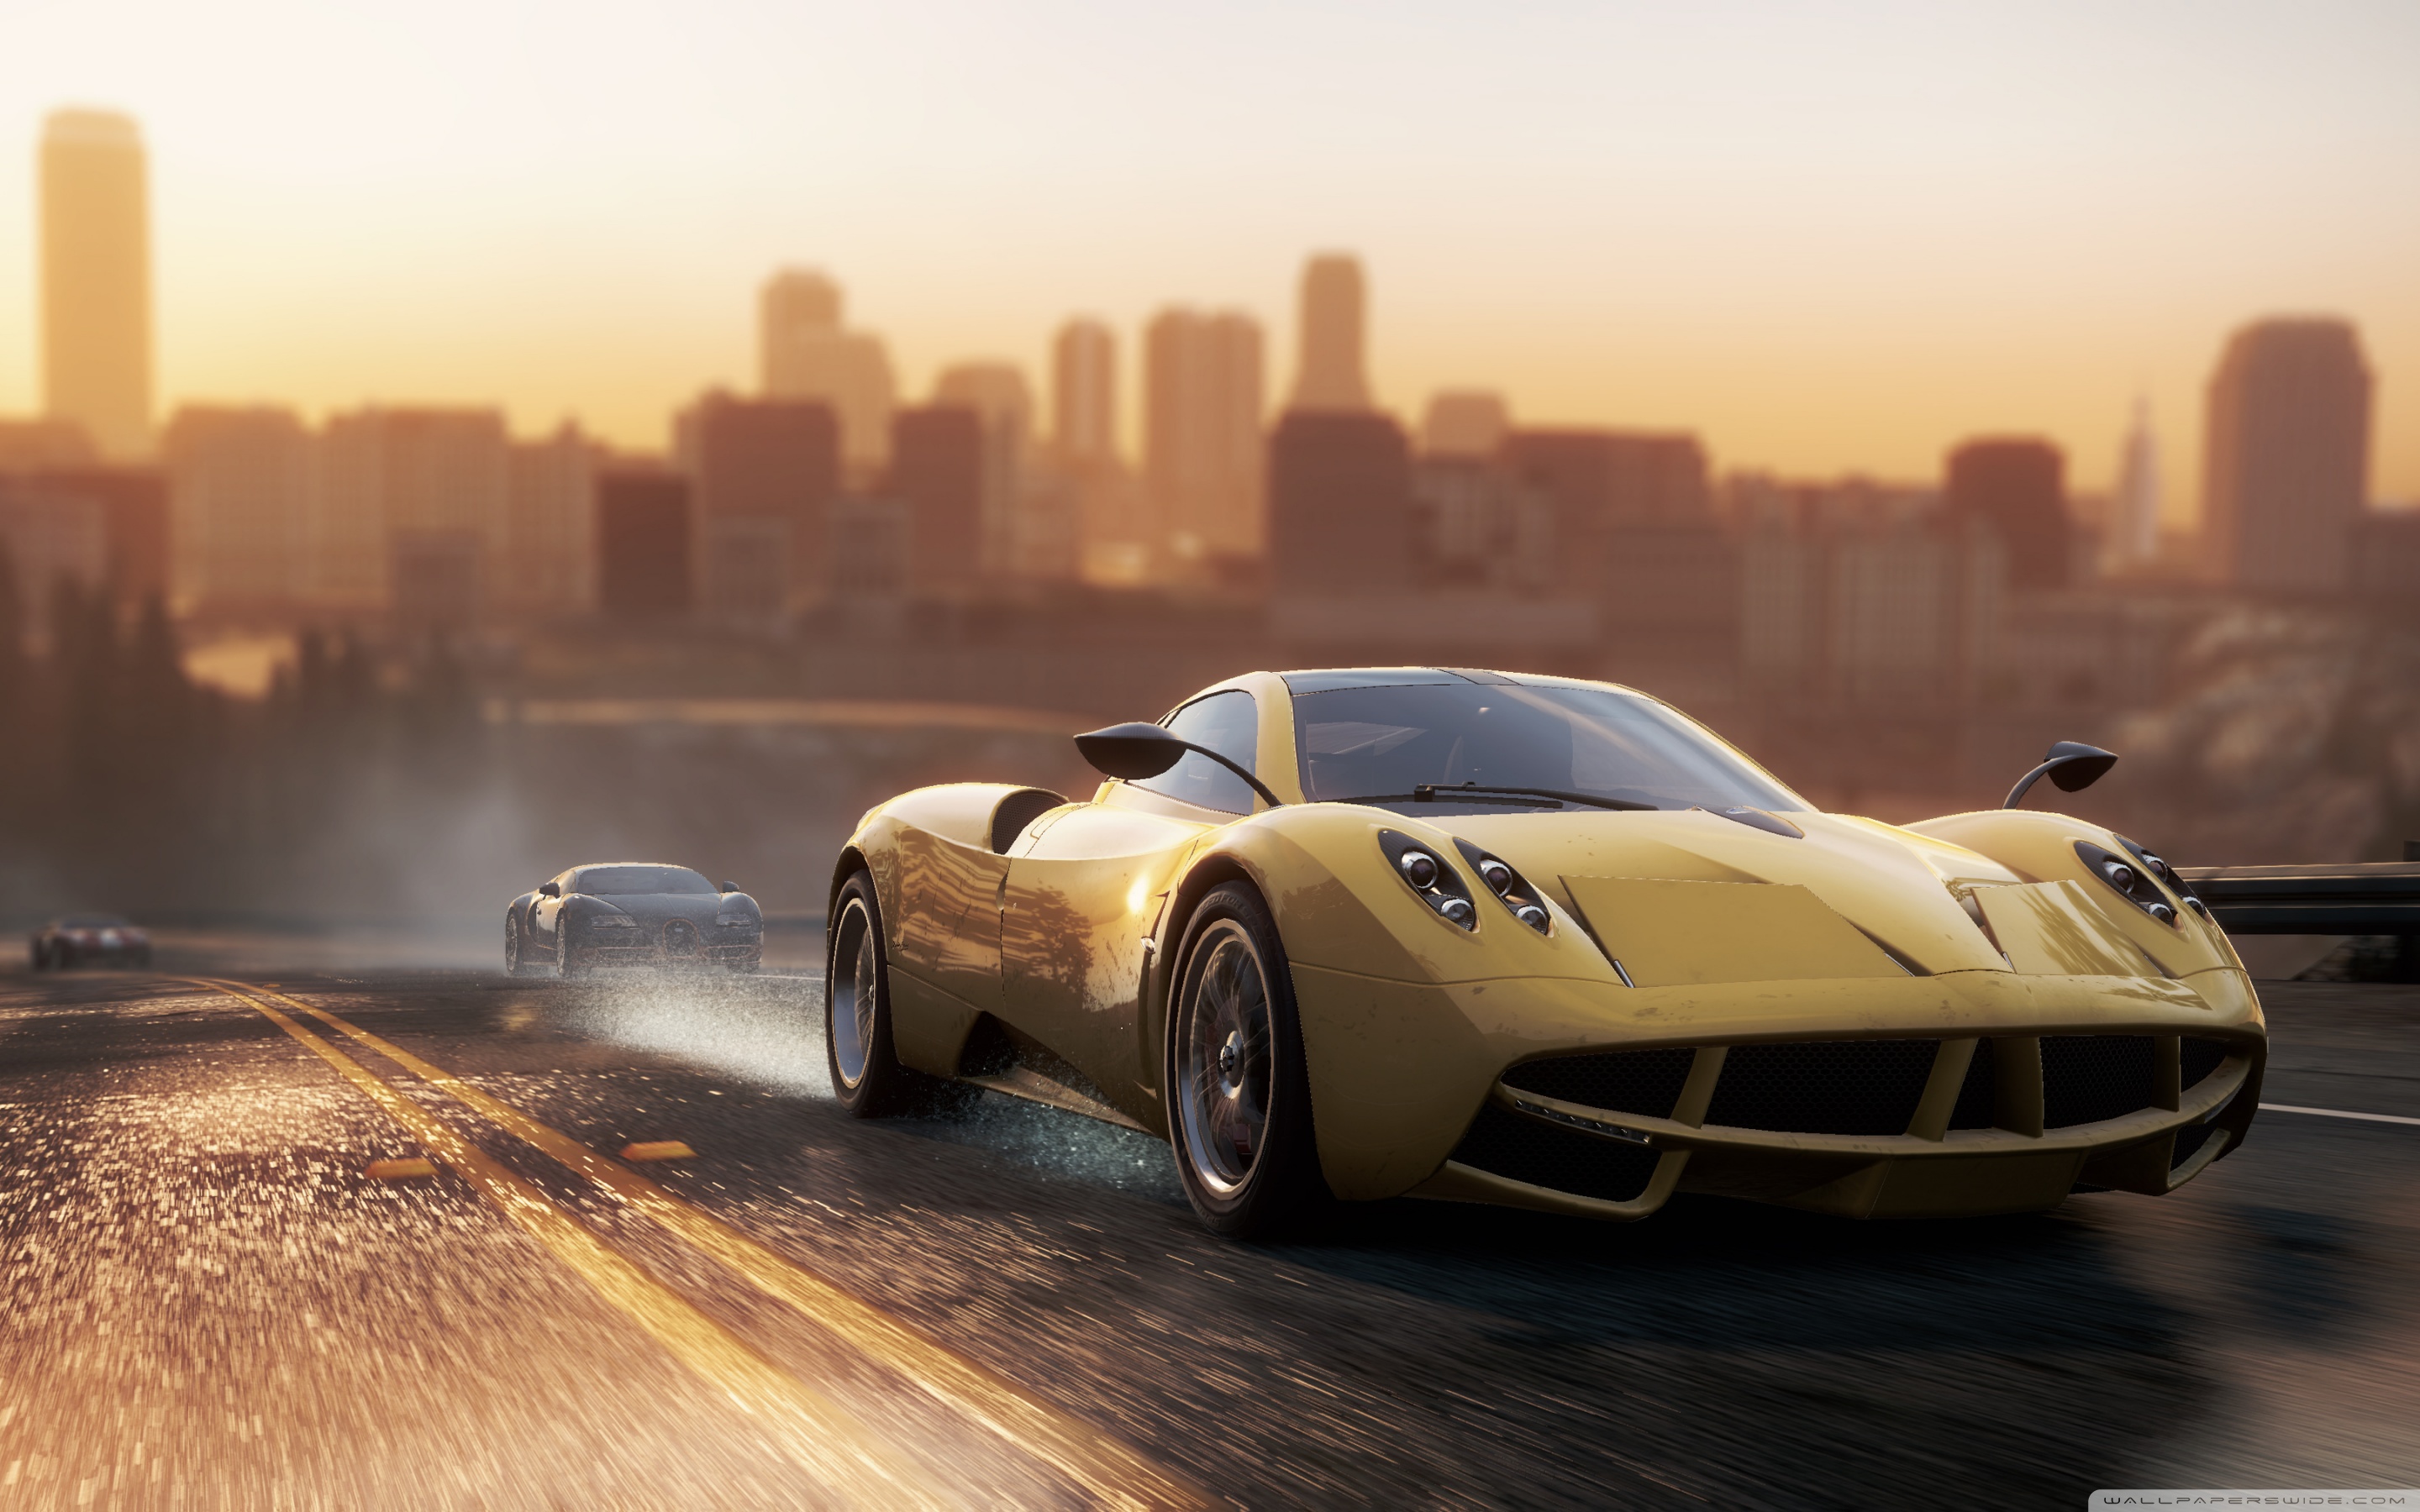 Need For Speed: Most Wanted Wallpapers